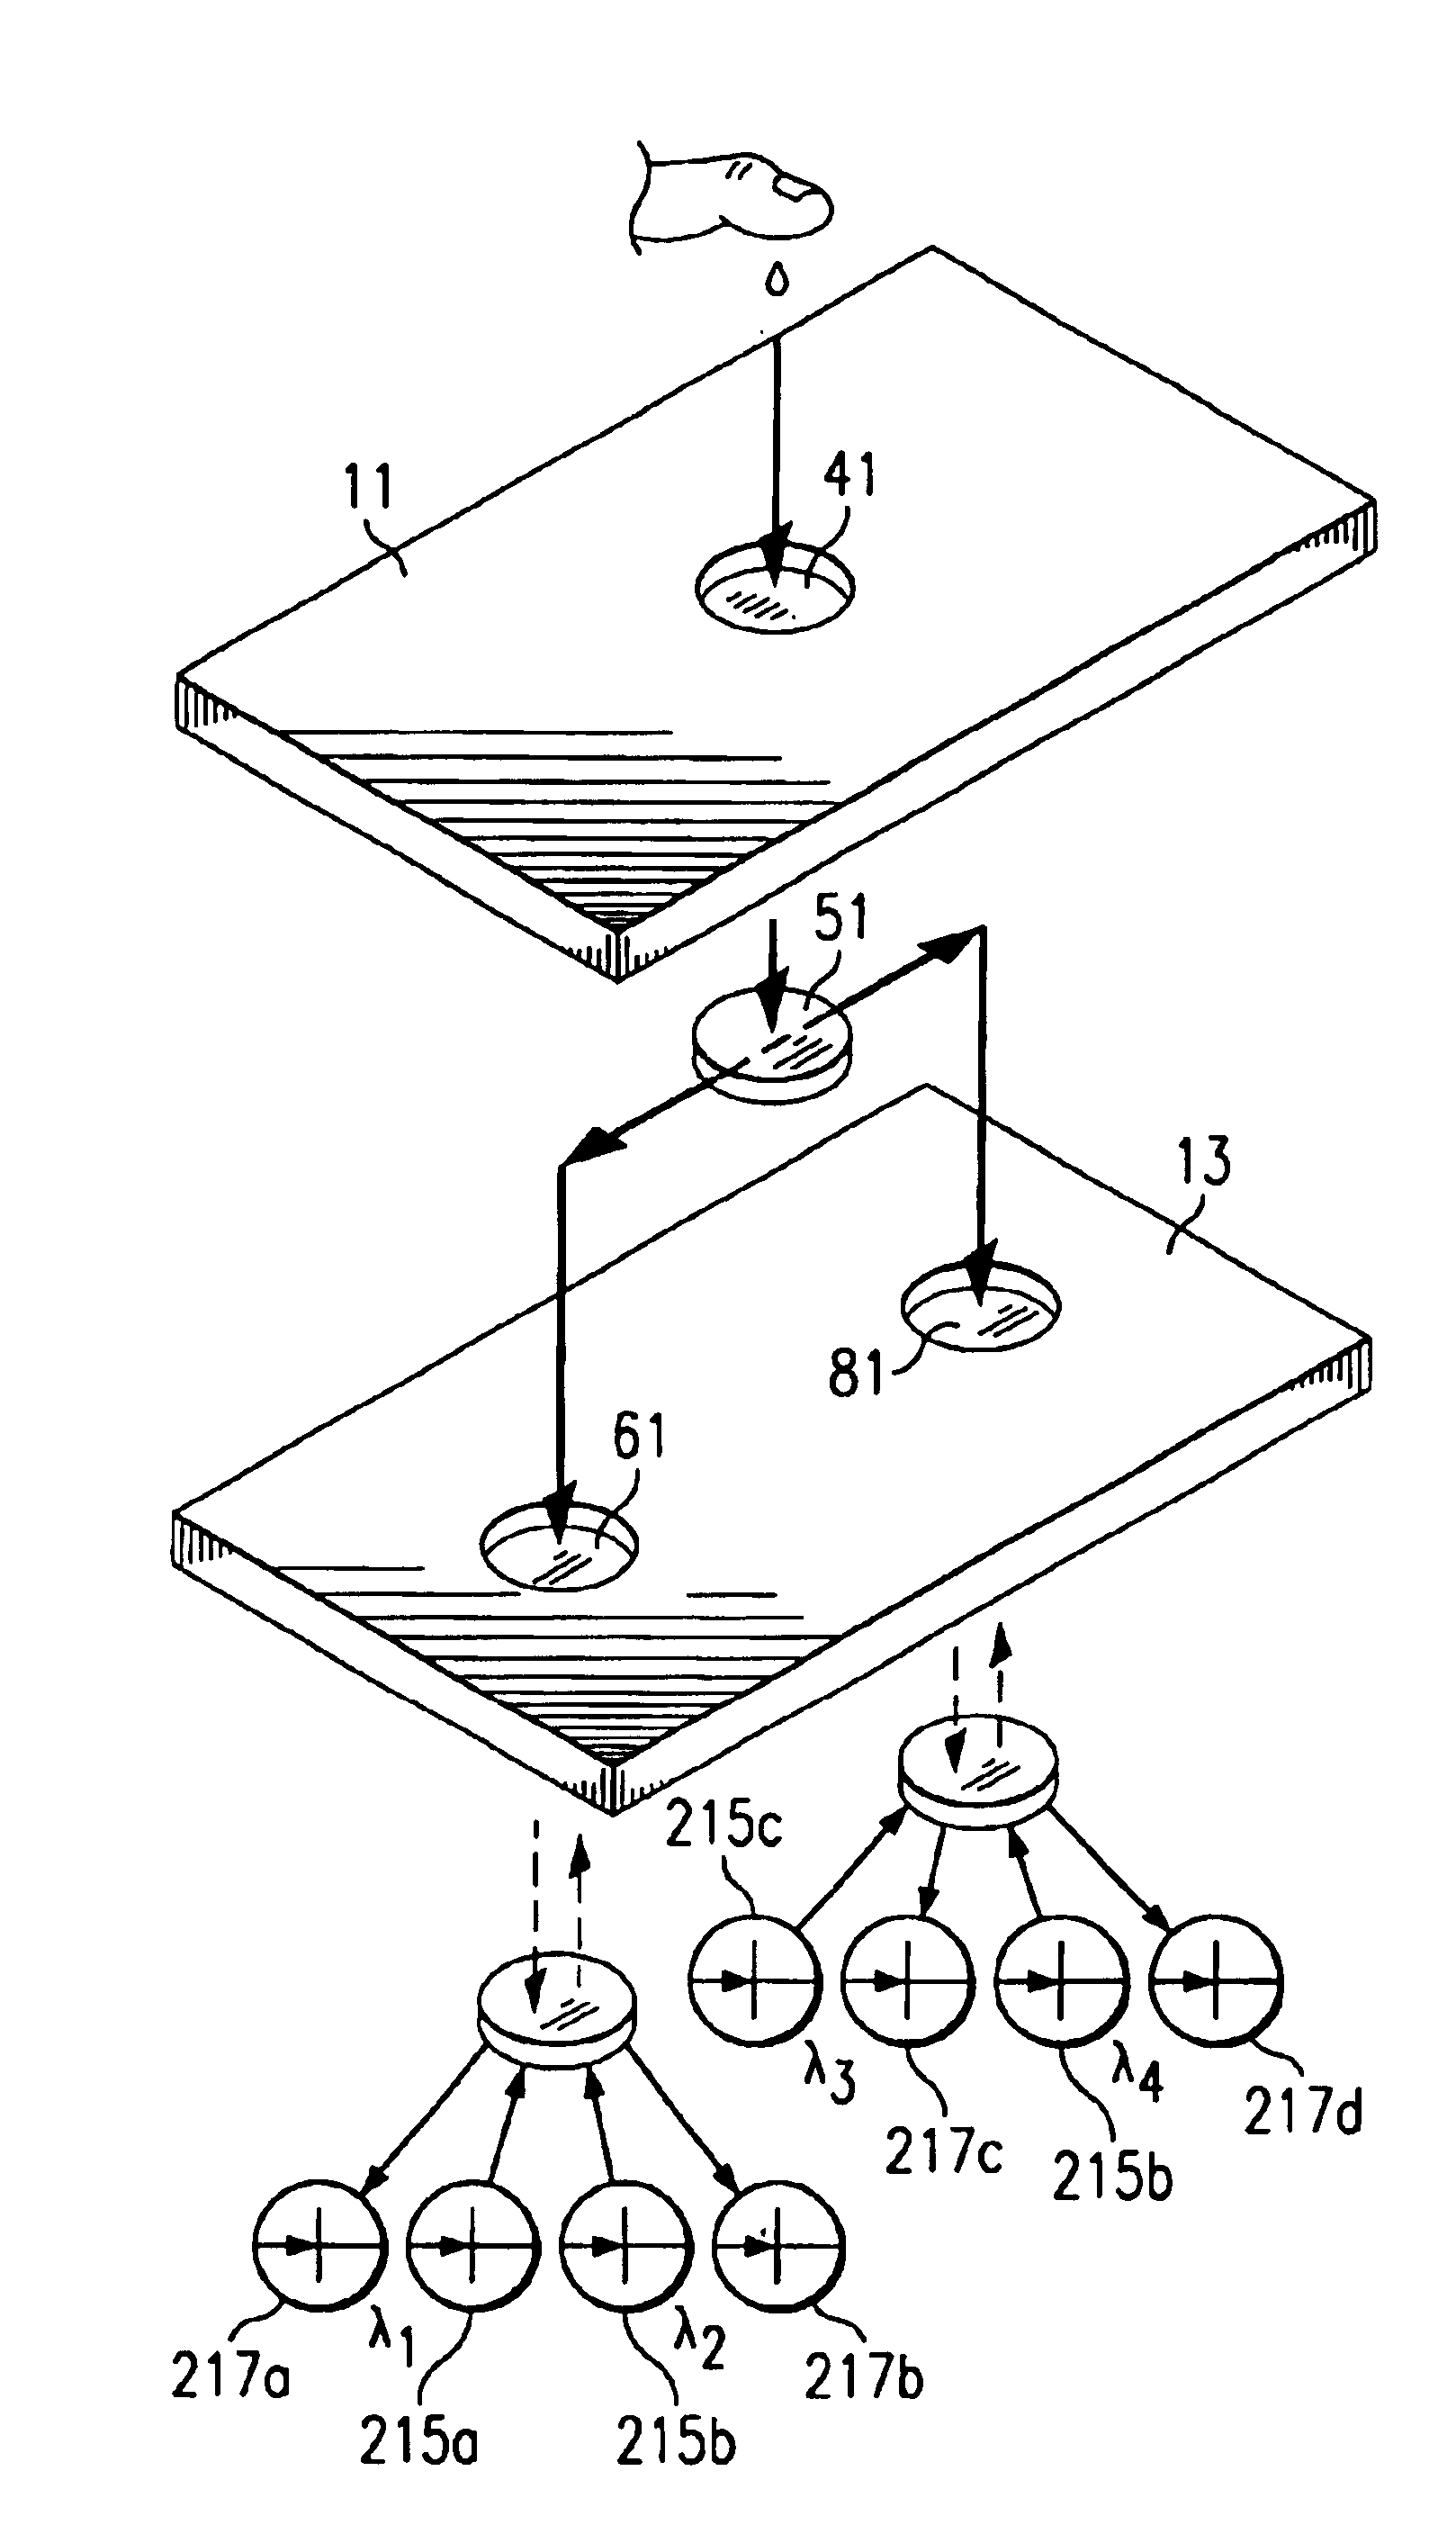 Method, system, and apparatus for measurement and recording of blood chemistry and other physiological measurements